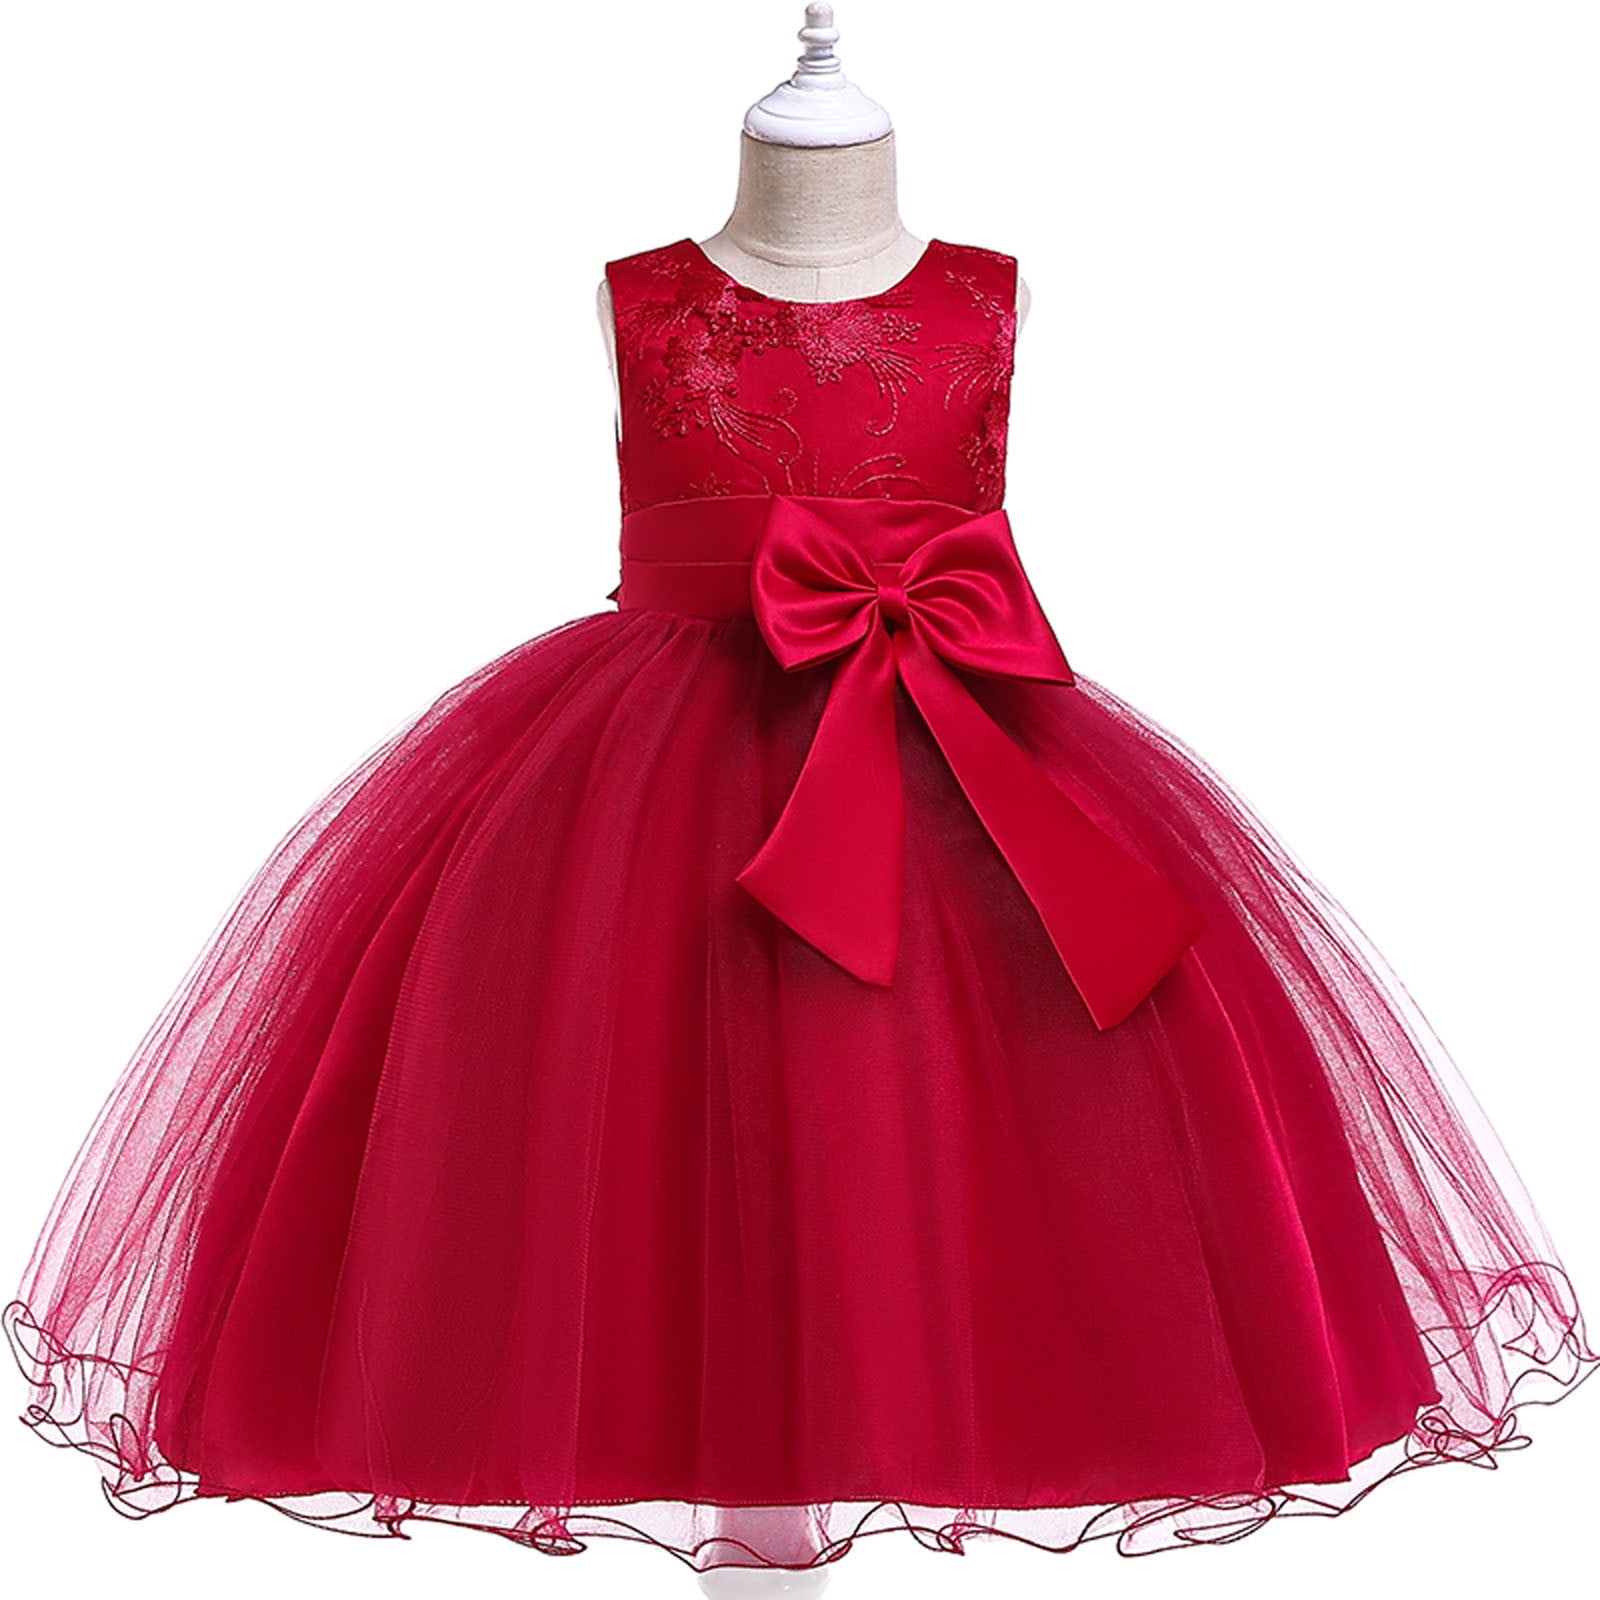 Penkiiy Toddler Girls Net Yarn Embroidery Bowknot Birthday Party Gown ...